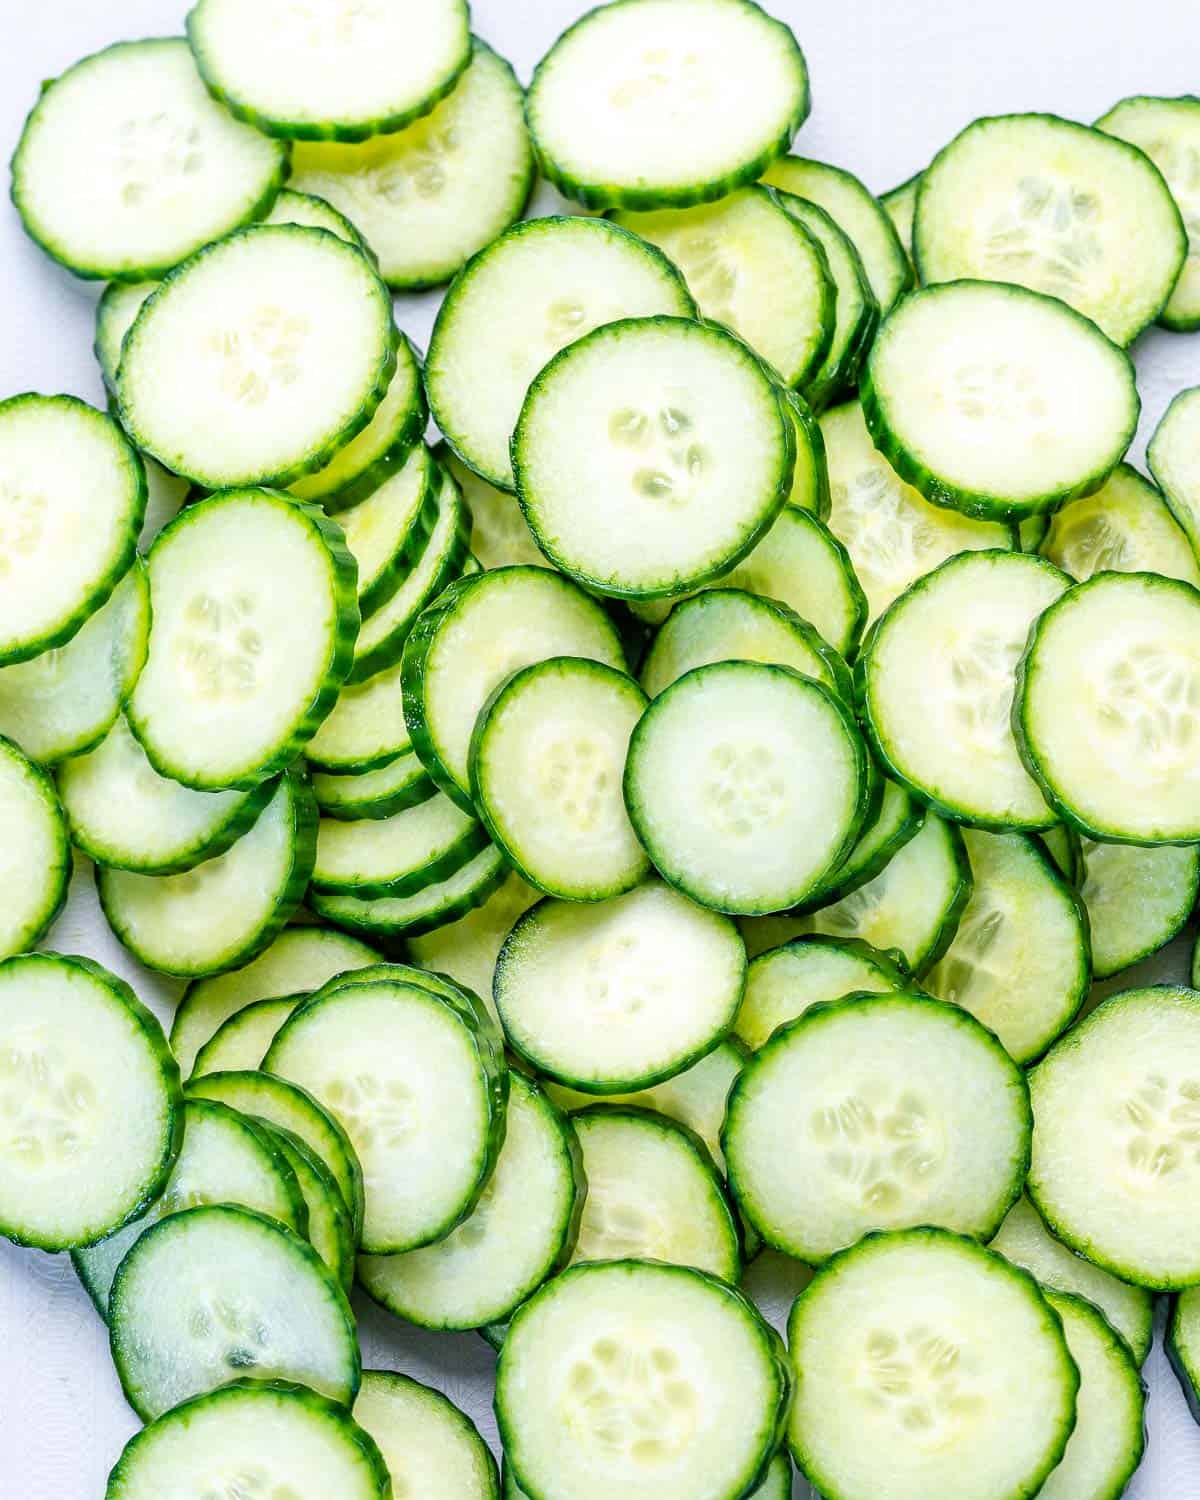 cucumber slices on surface